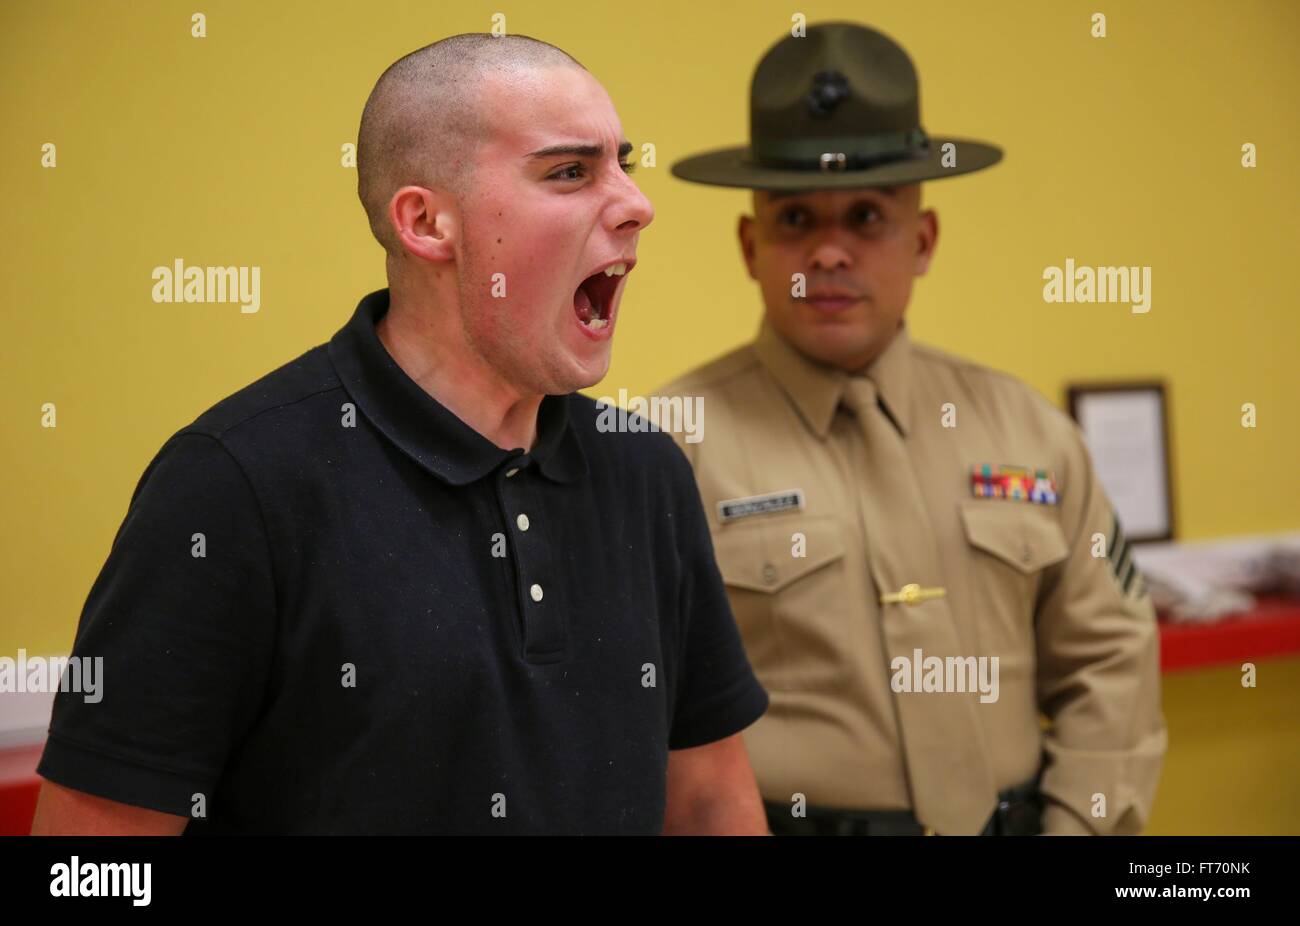 A US Marine Corps drill instructor screams at a Marine recruit during boot camp at Marine Corps Recruit Depot December 15, 2015 in San Diego, California. The depot is responsible for training more than 16,000 recruits annually. Stock Photo